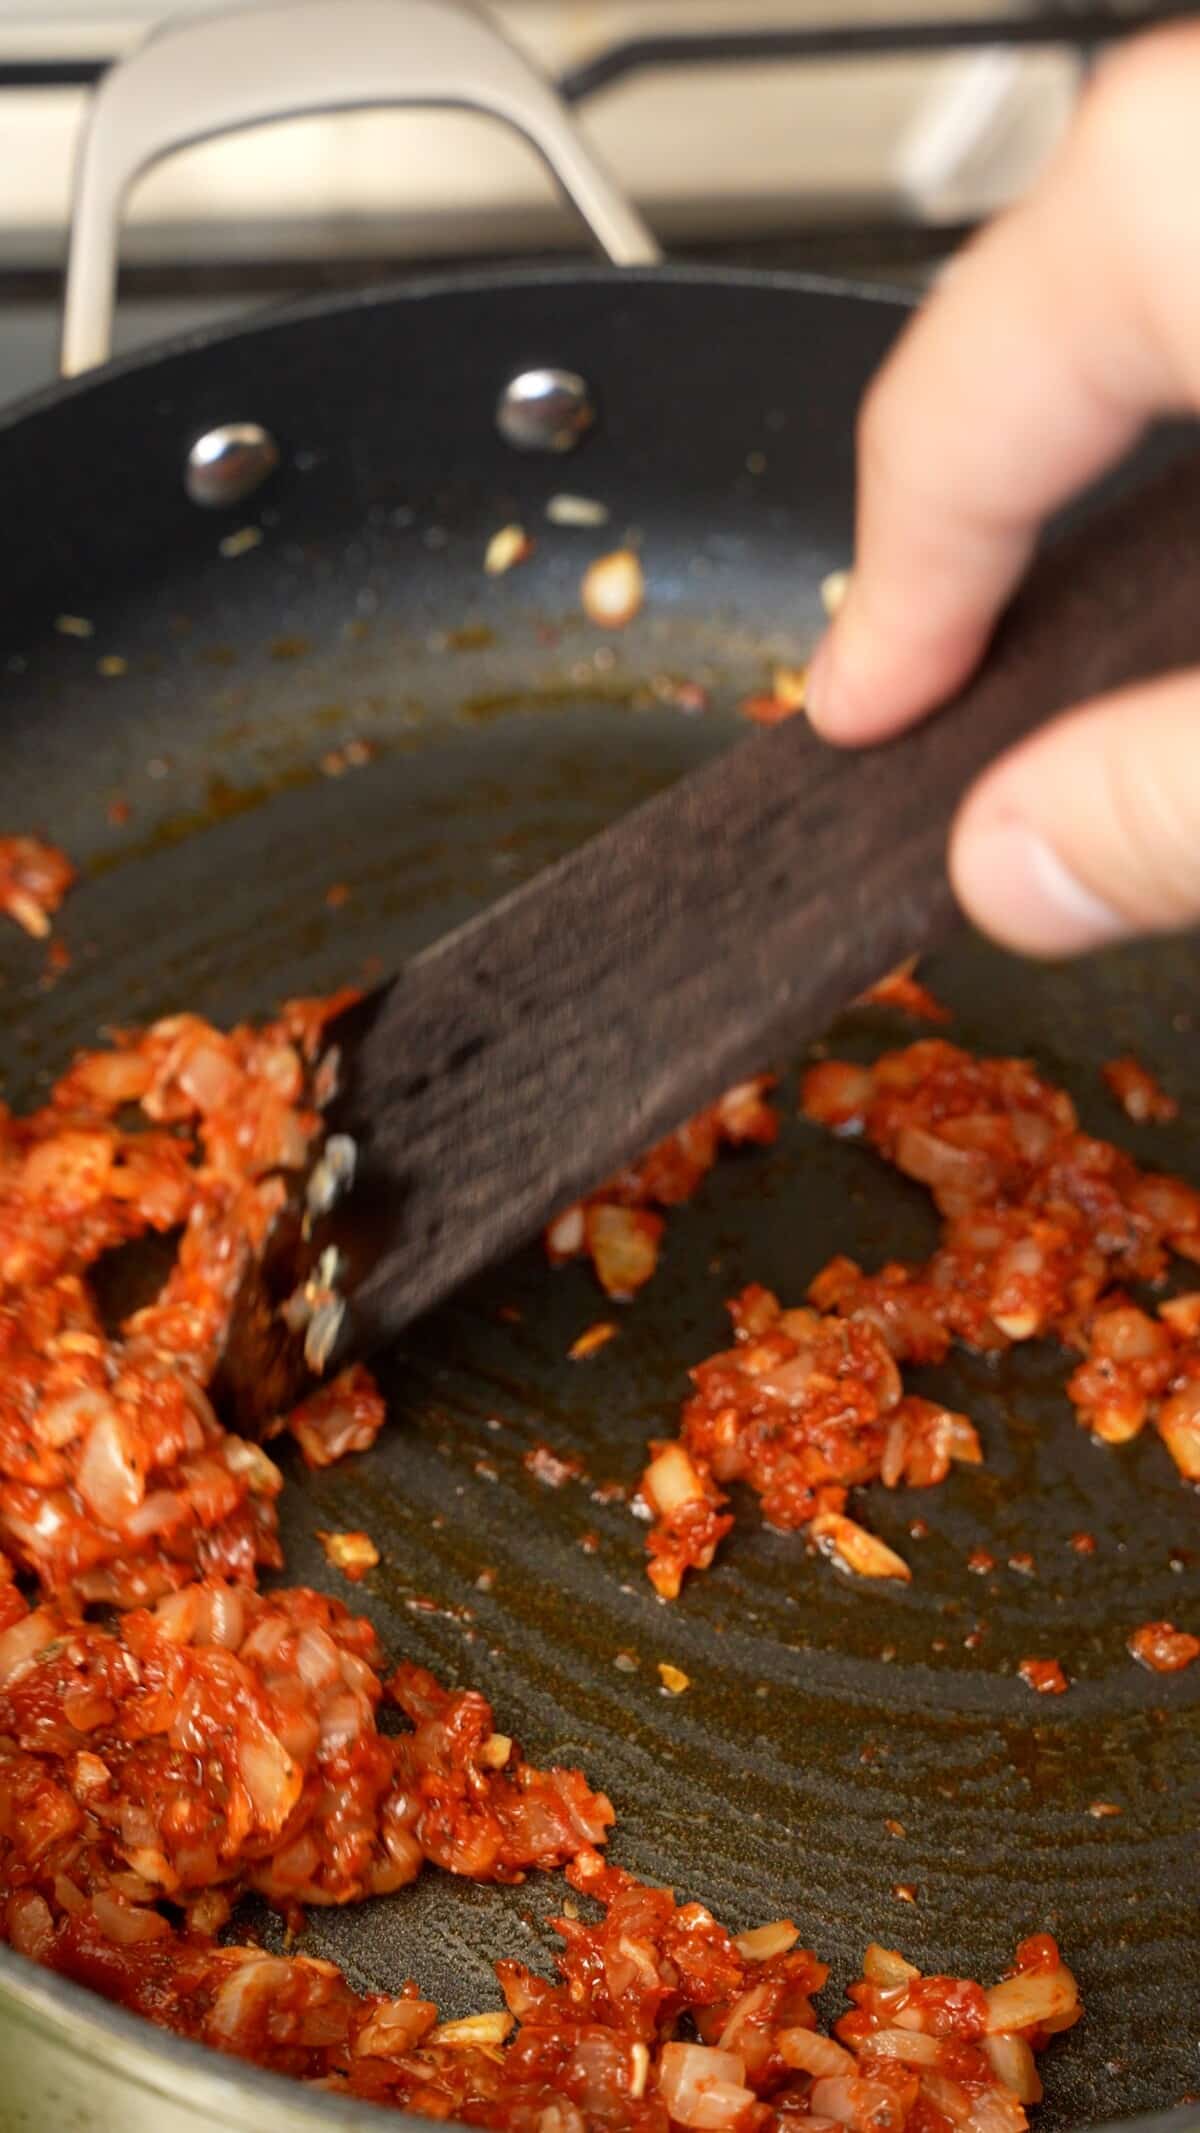 Cooking tomato paste with onions and garlic in a pan.